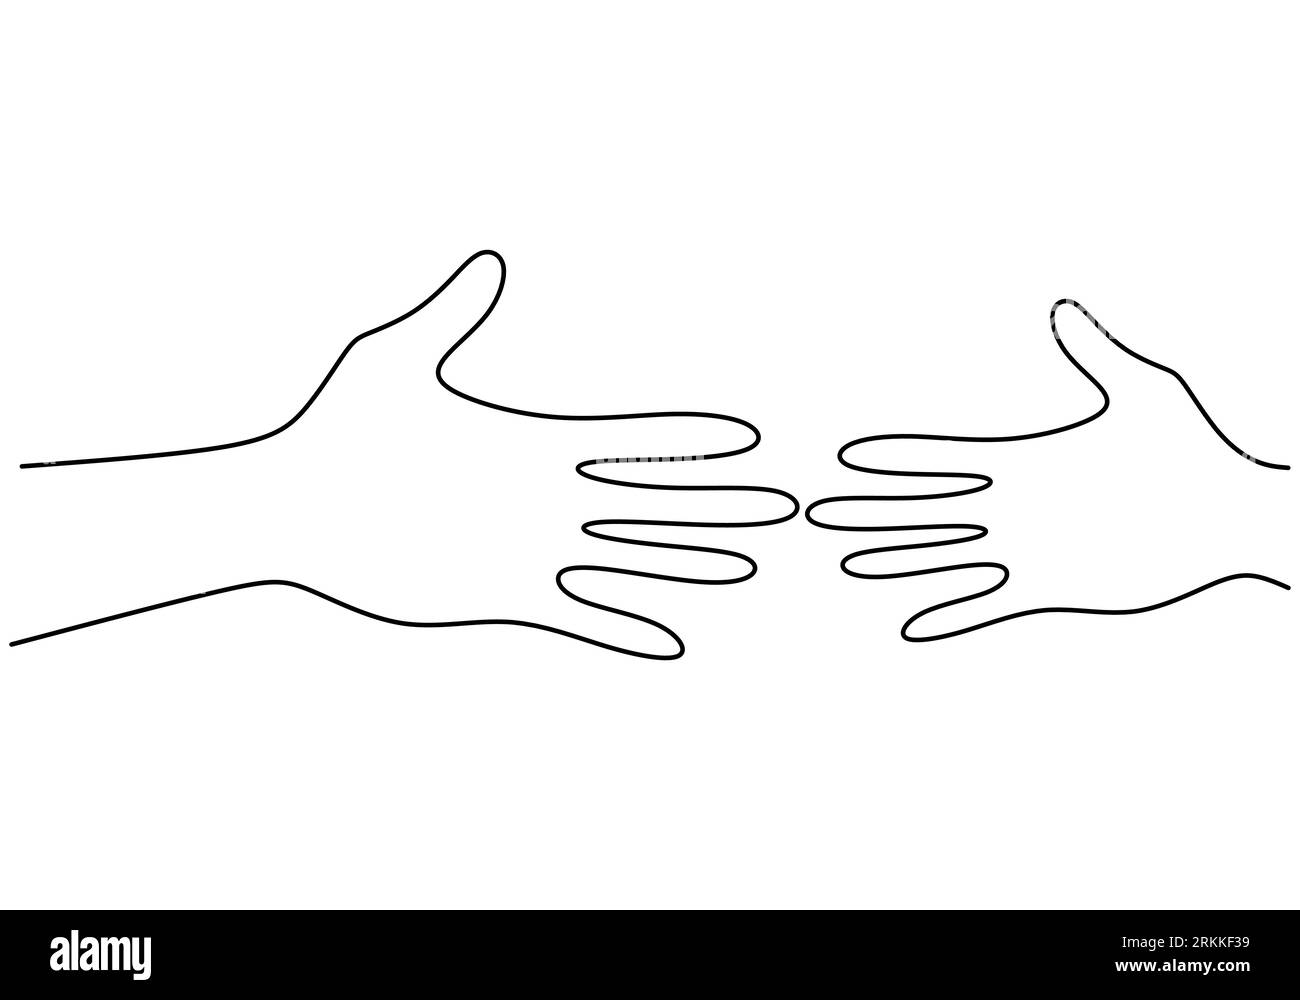 Continuous One Line Drawing of Couple Holding Hands. Concept of Romantic  and Act of Kindness. a Man Share Love with His Partner Stock Vector -  Illustration of sketch, male: 161080135